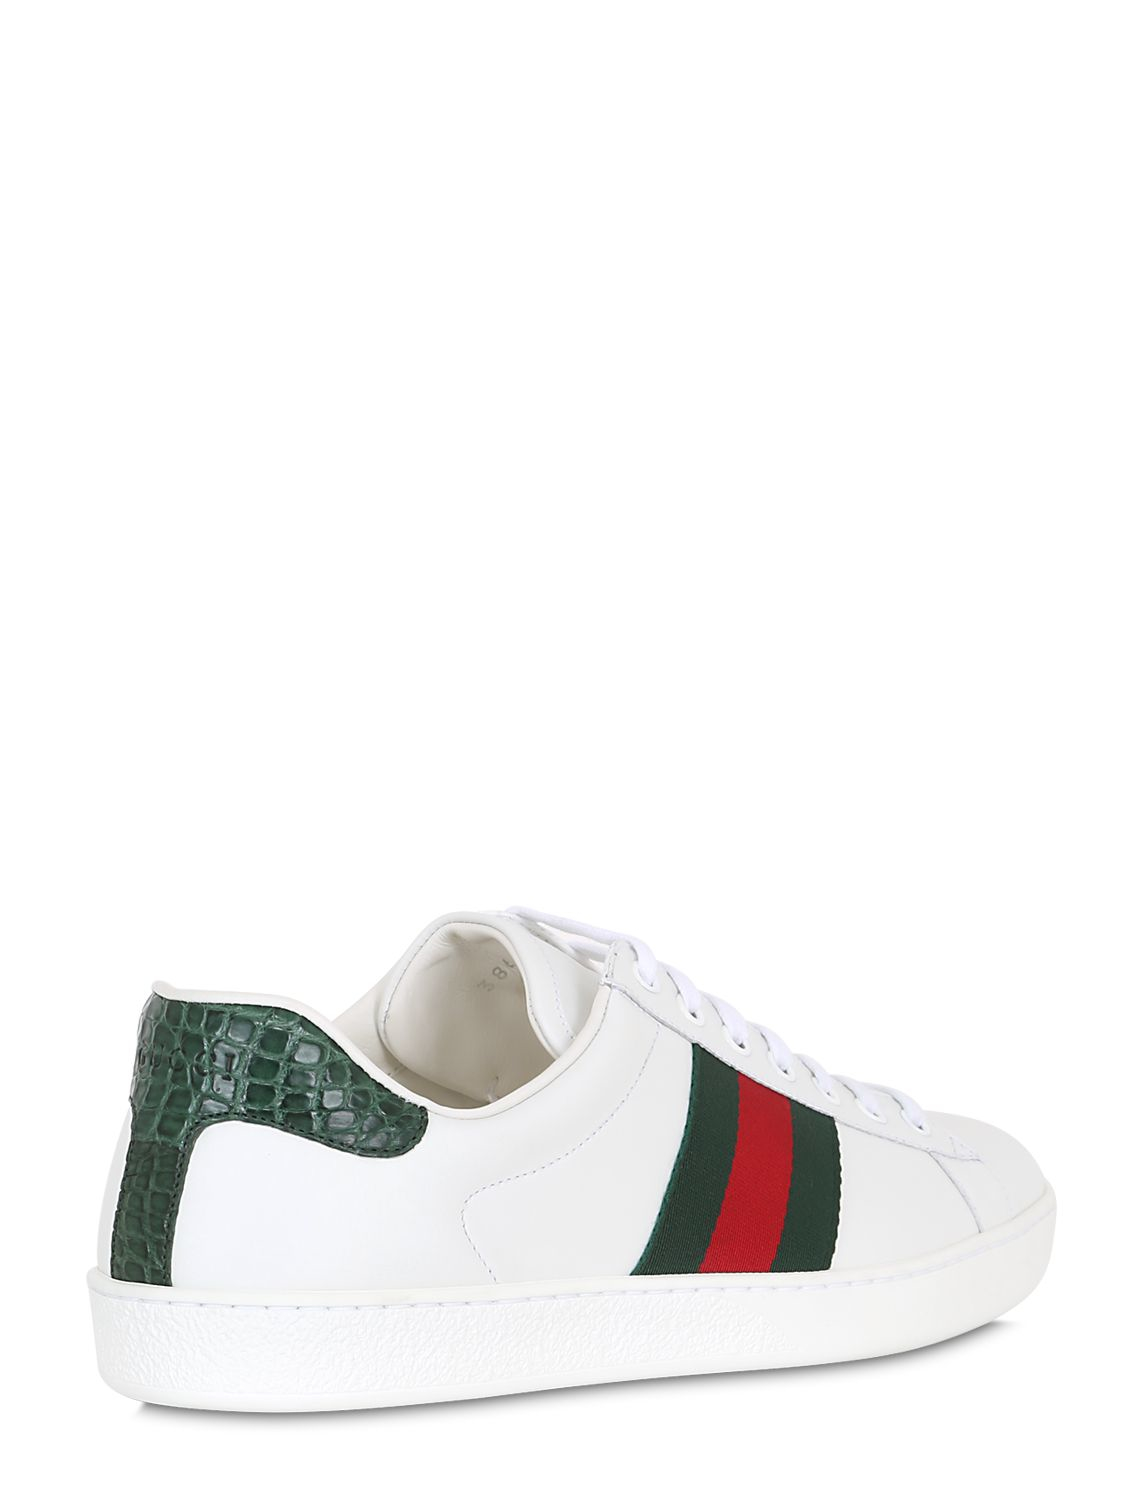 Gucci New Ace Web Leather & Crocodile Sneakers in White for Men | Lyst